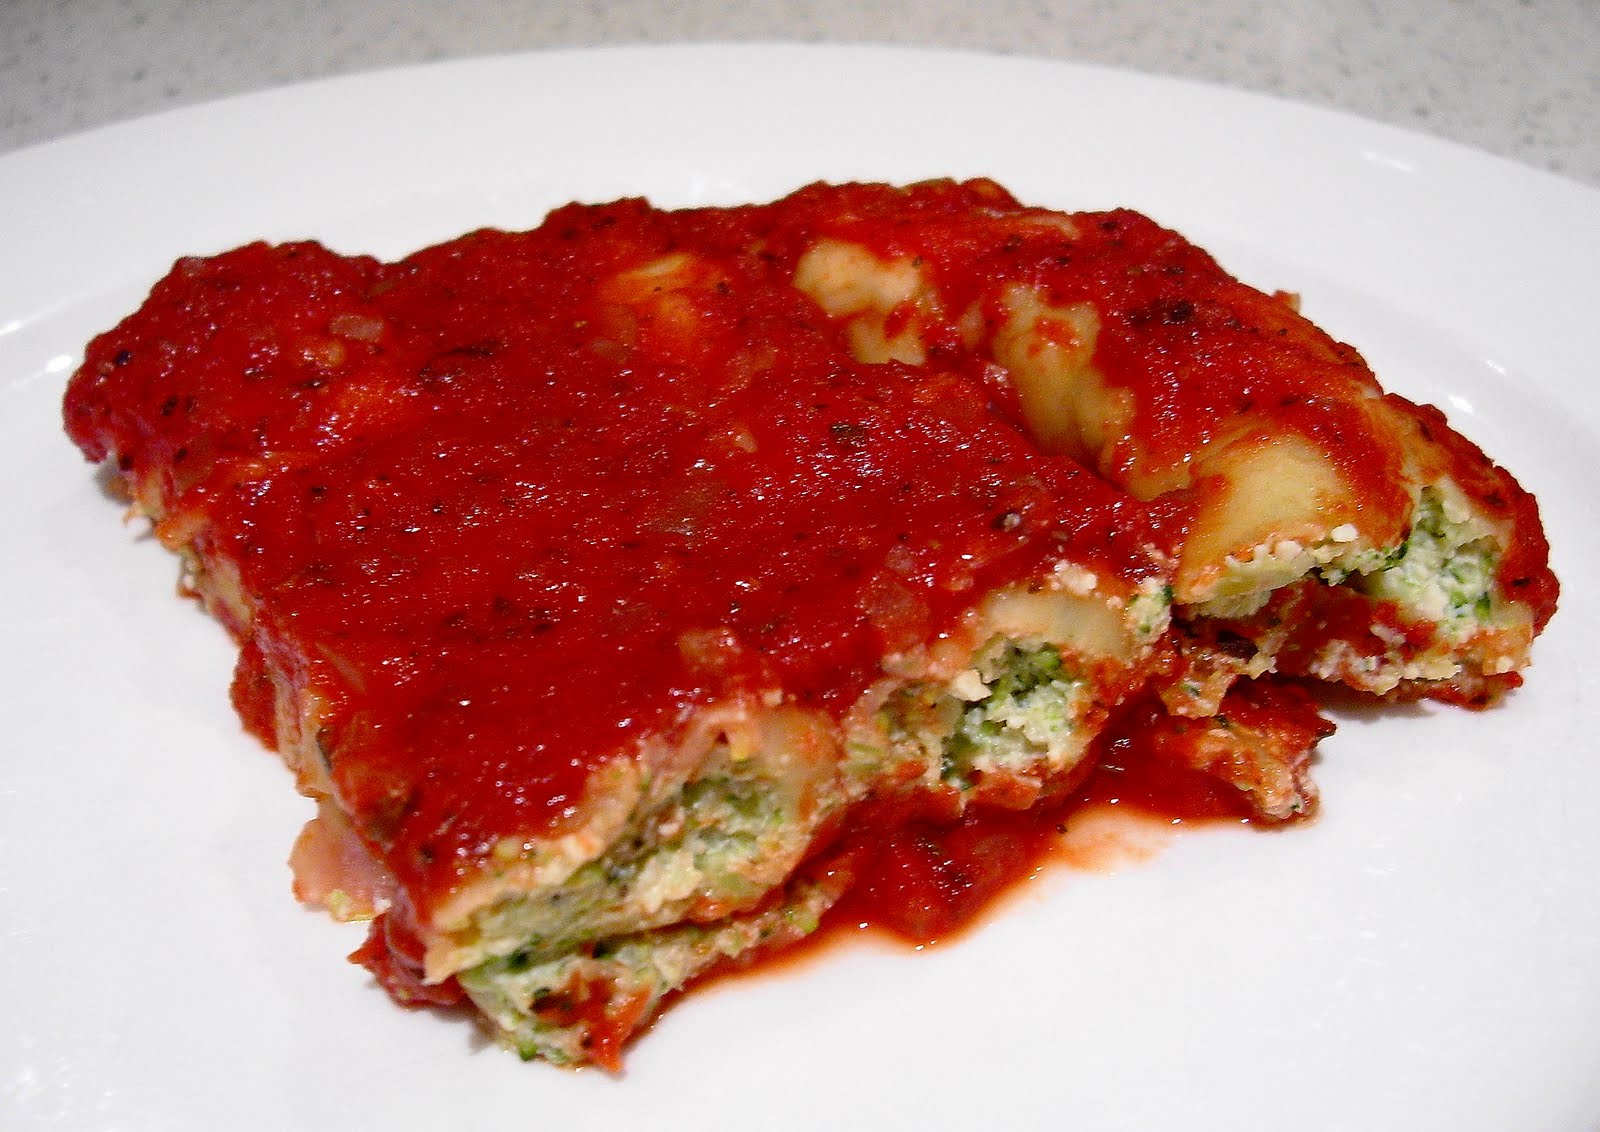 Veganise This!: Broccoli and tofu filled cannelloni